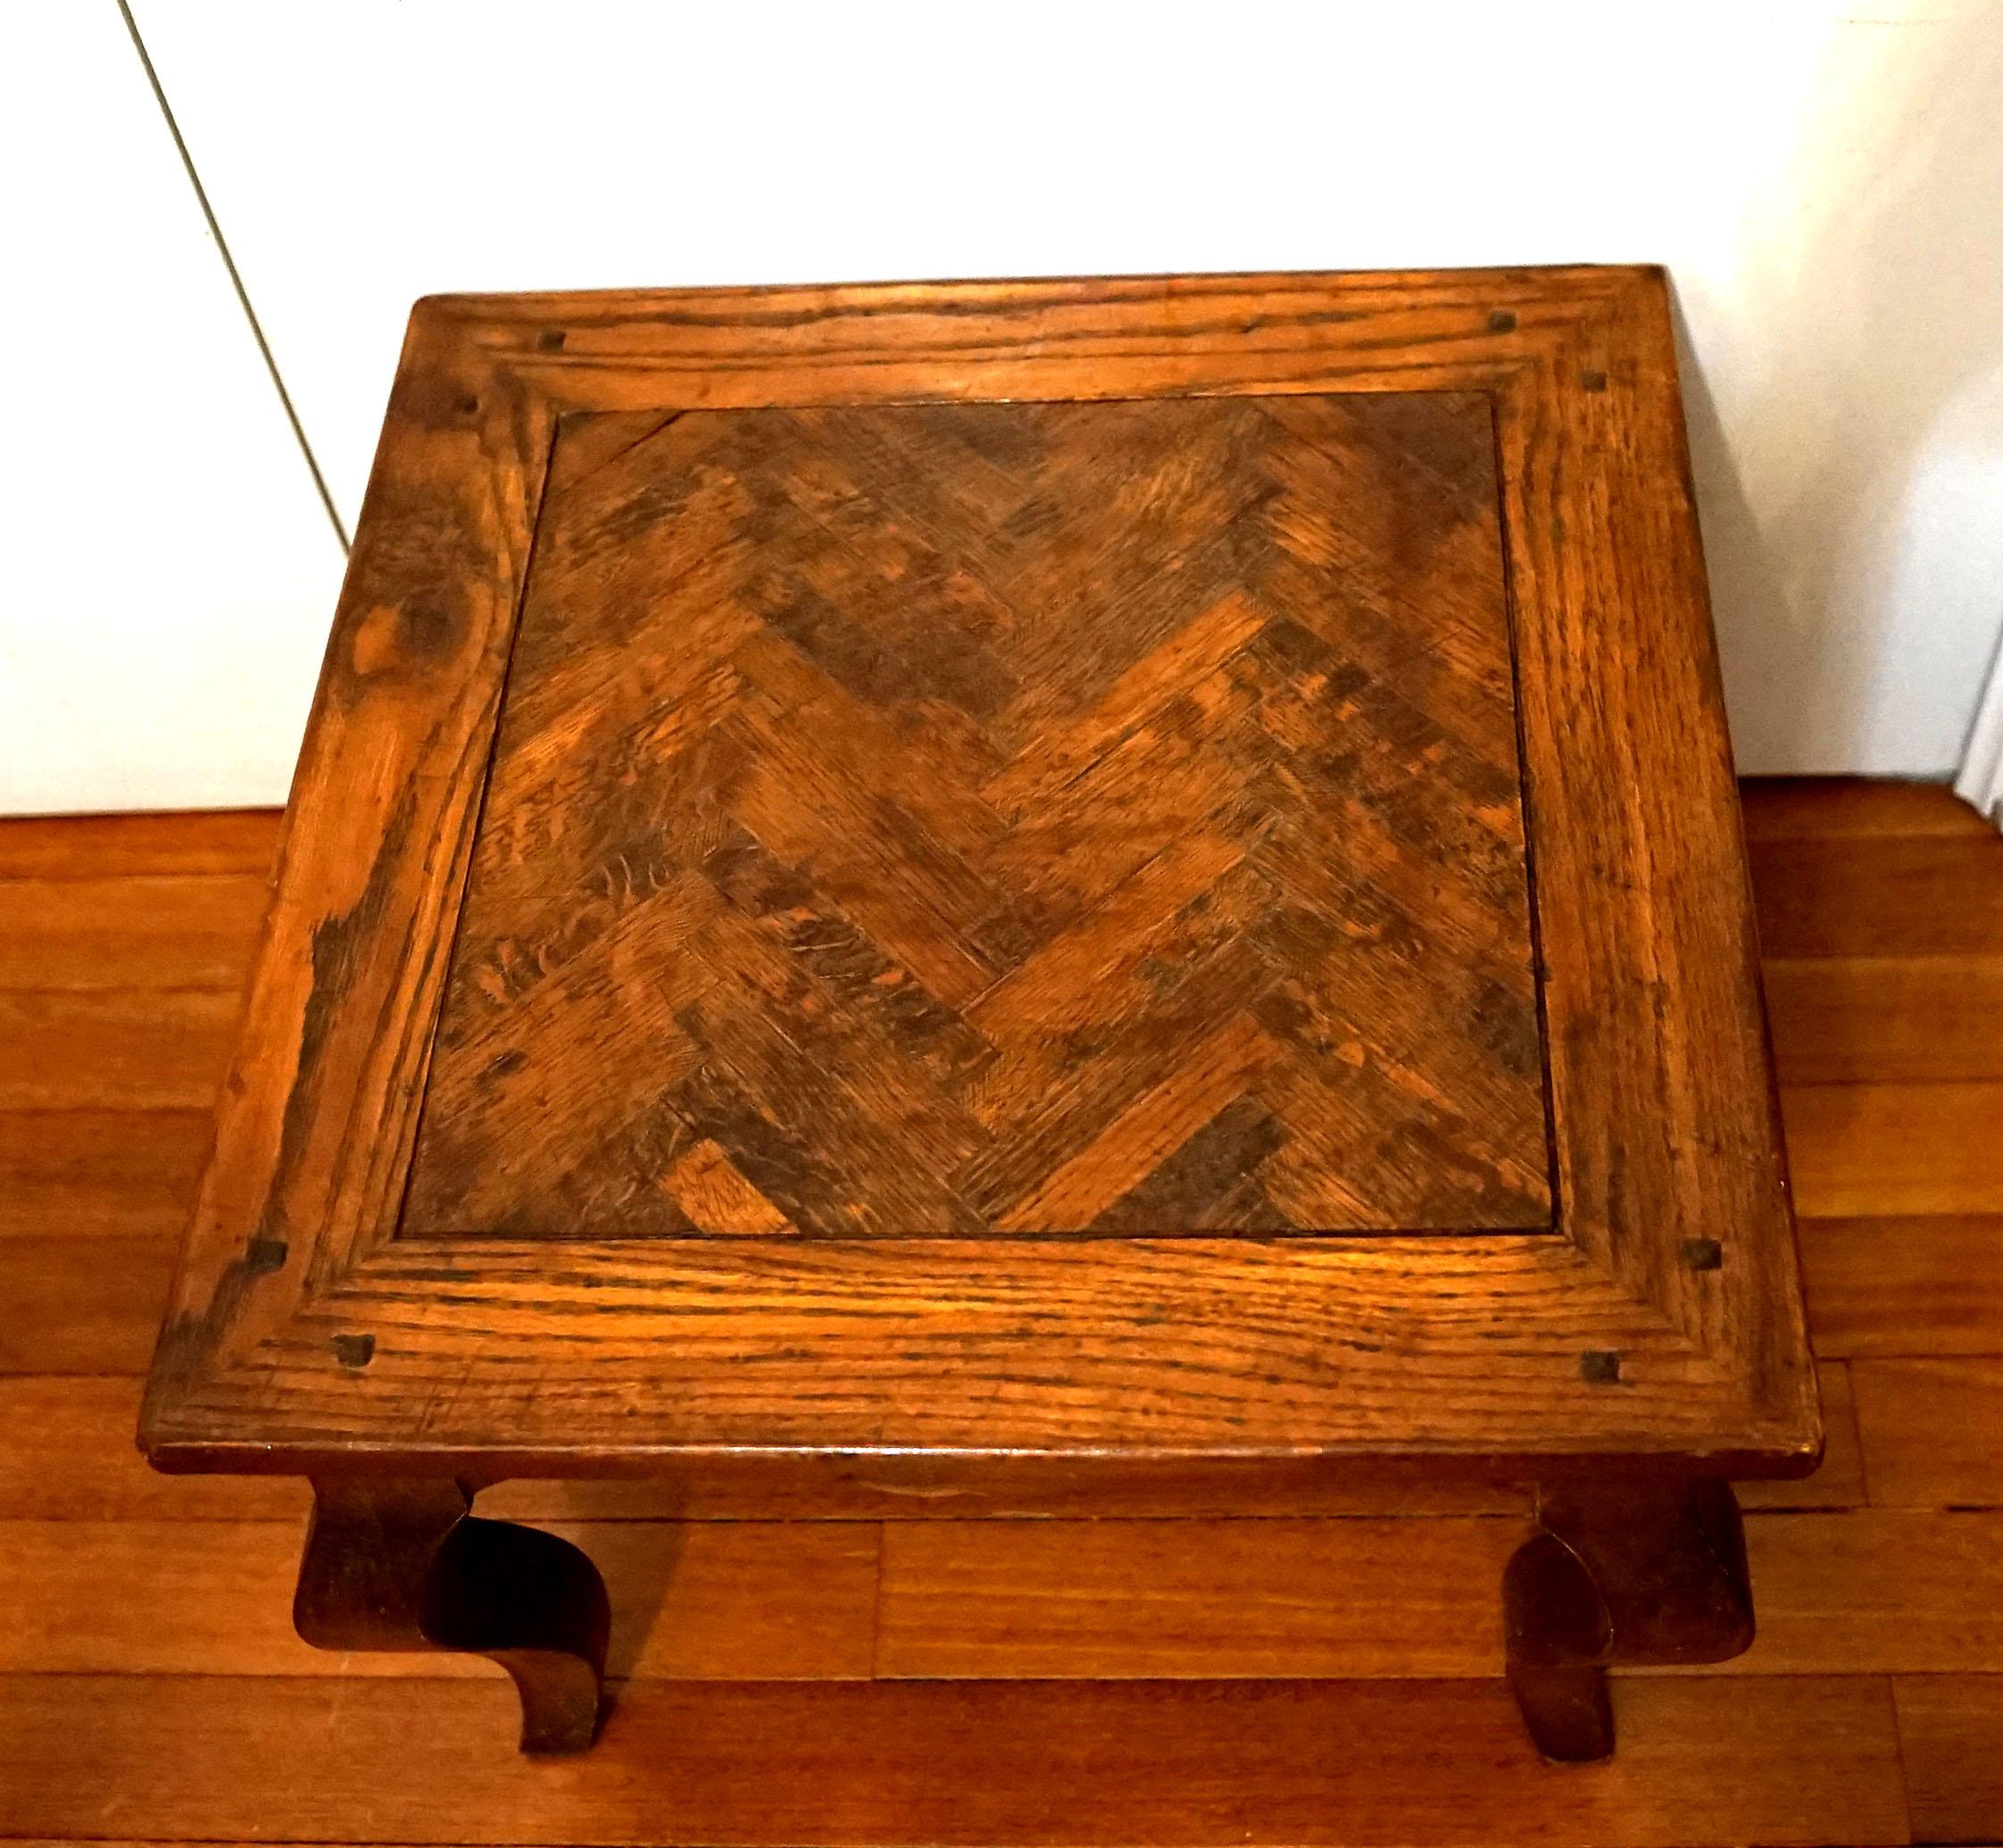 Régence 1900 Regence Herringbone Inset Parquetry Oak Table with Cabriole Legs